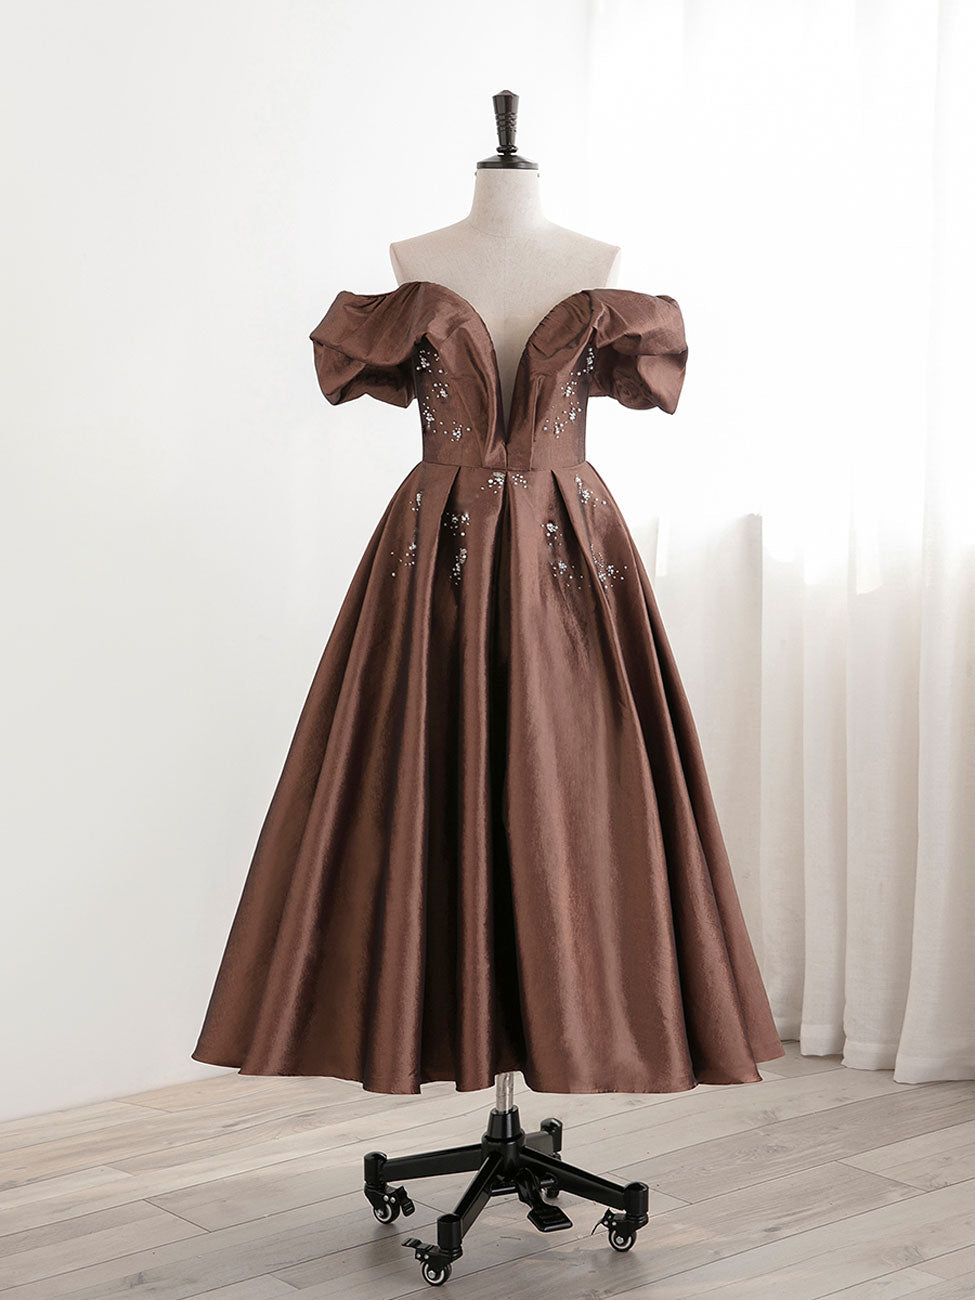 A-Line Tea length Brown Corset Prom dresses, Off Shoulder Brown Corset Formal Dress with Beading outfit, Party Dress